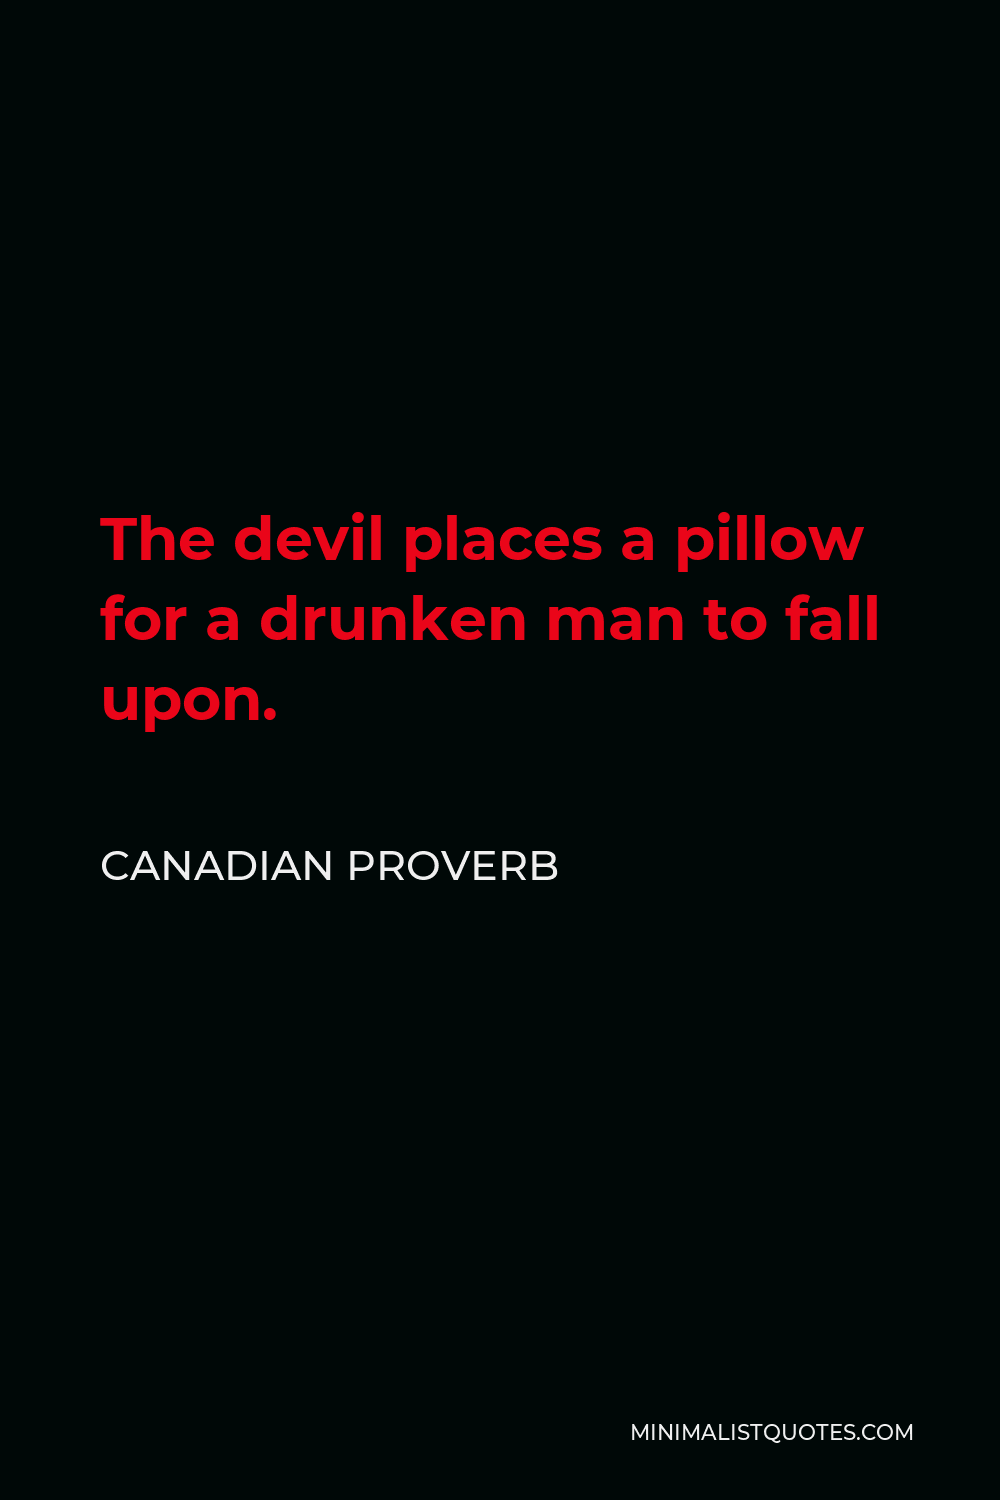 Canadian Proverb Quote - The devil places a pillow for a drunken man to fall upon.